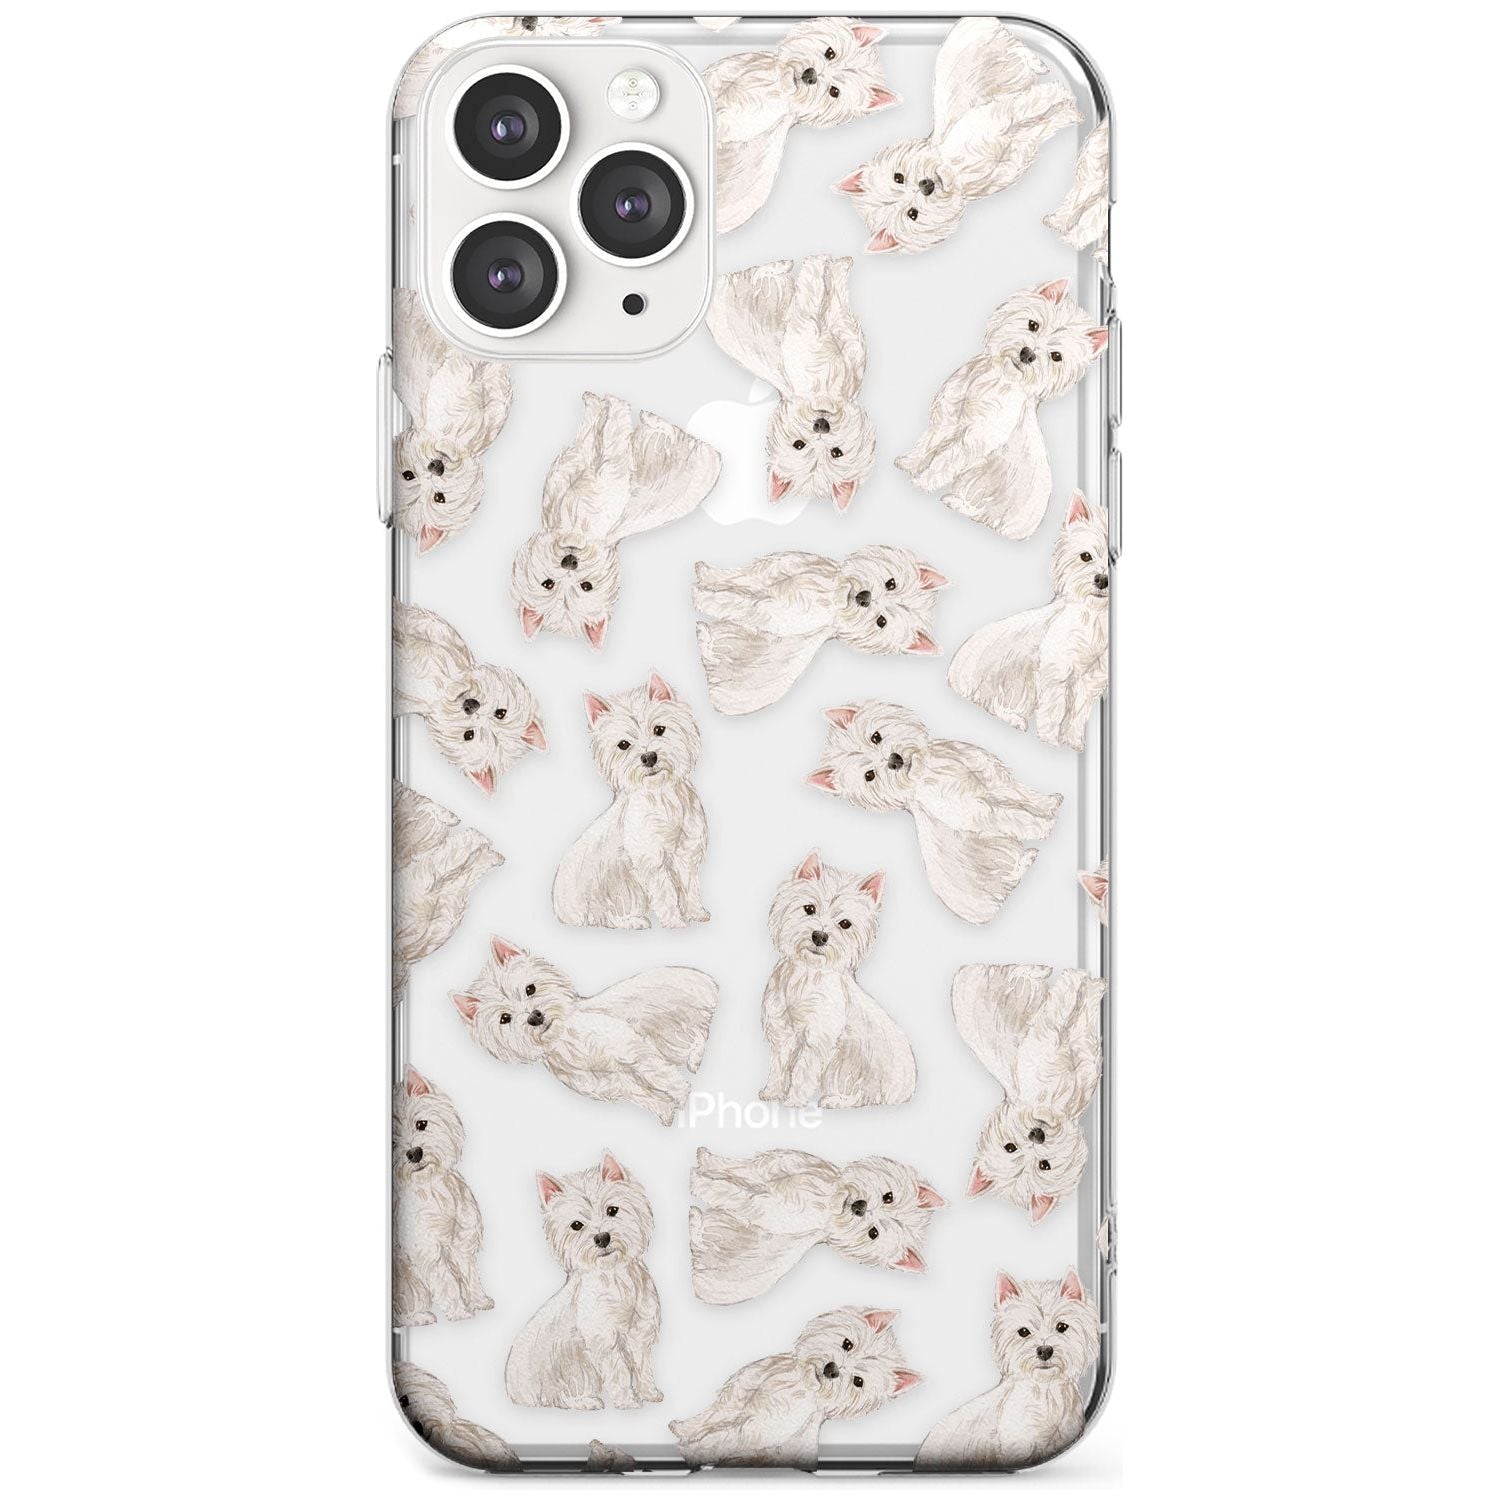 Westie Watercolour Dog Pattern Slim TPU Phone Case for iPhone 11 Pro Max